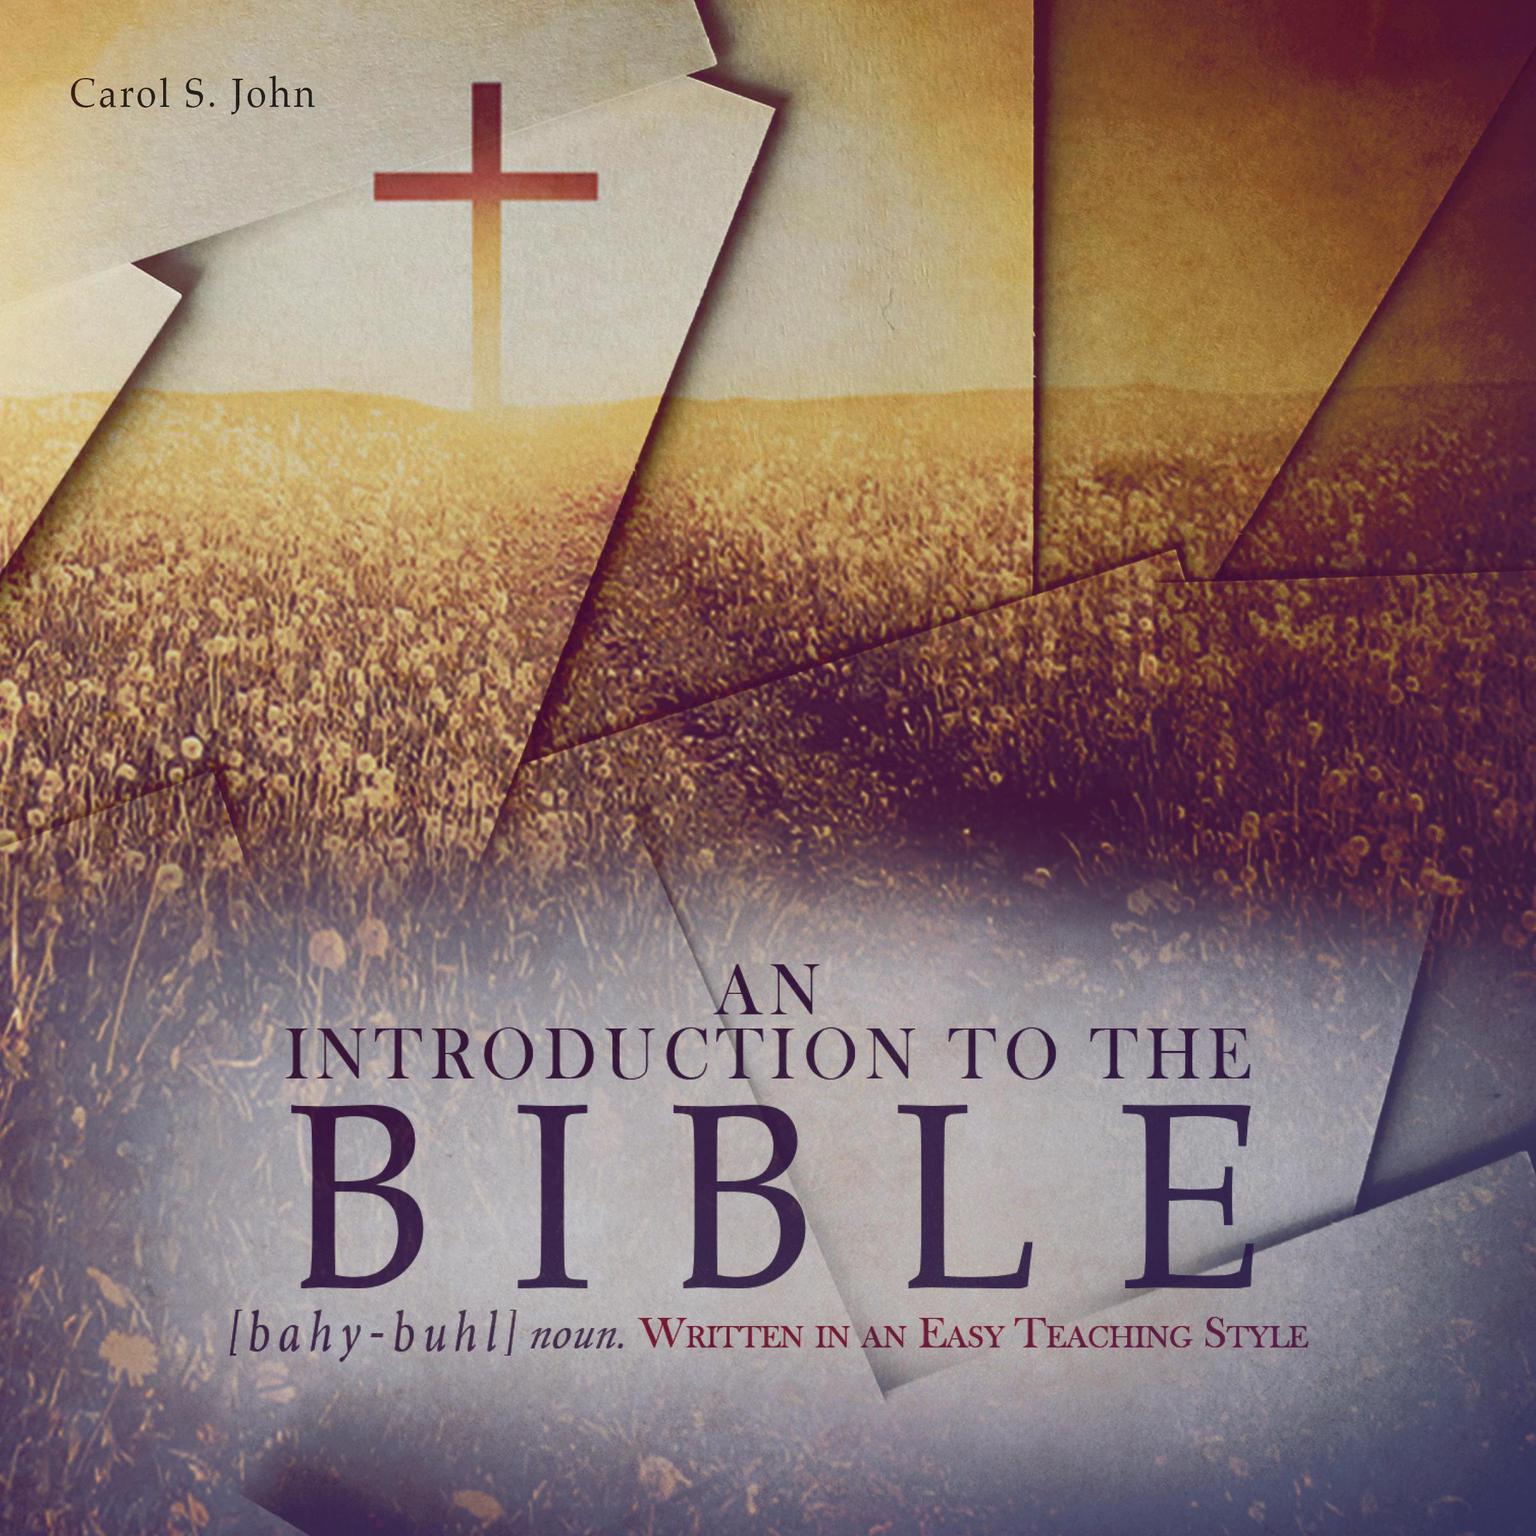 An Introduction to the Bible: Written in an Easy Teaching Style Audiobook, by Carol S. John